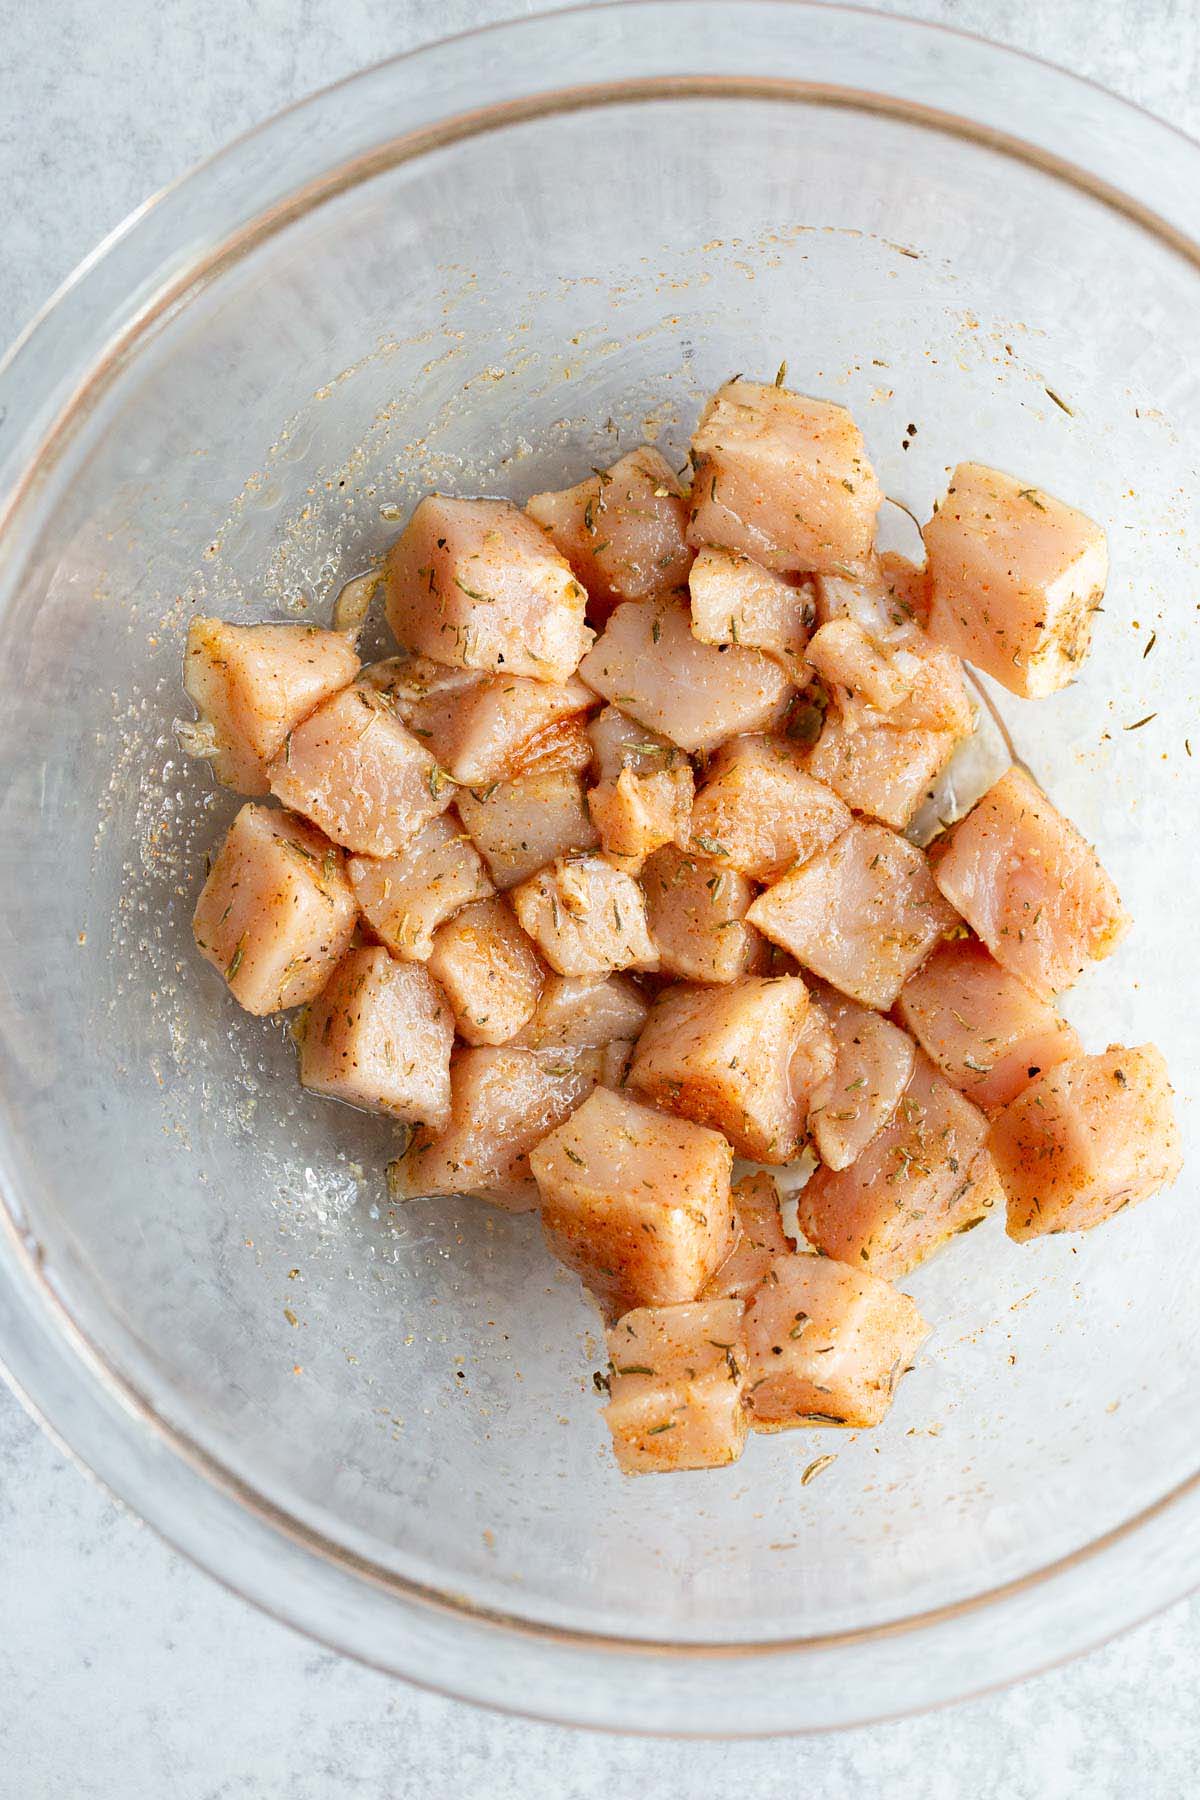 Raw cubed pork in a bowl mixed with seasonings.